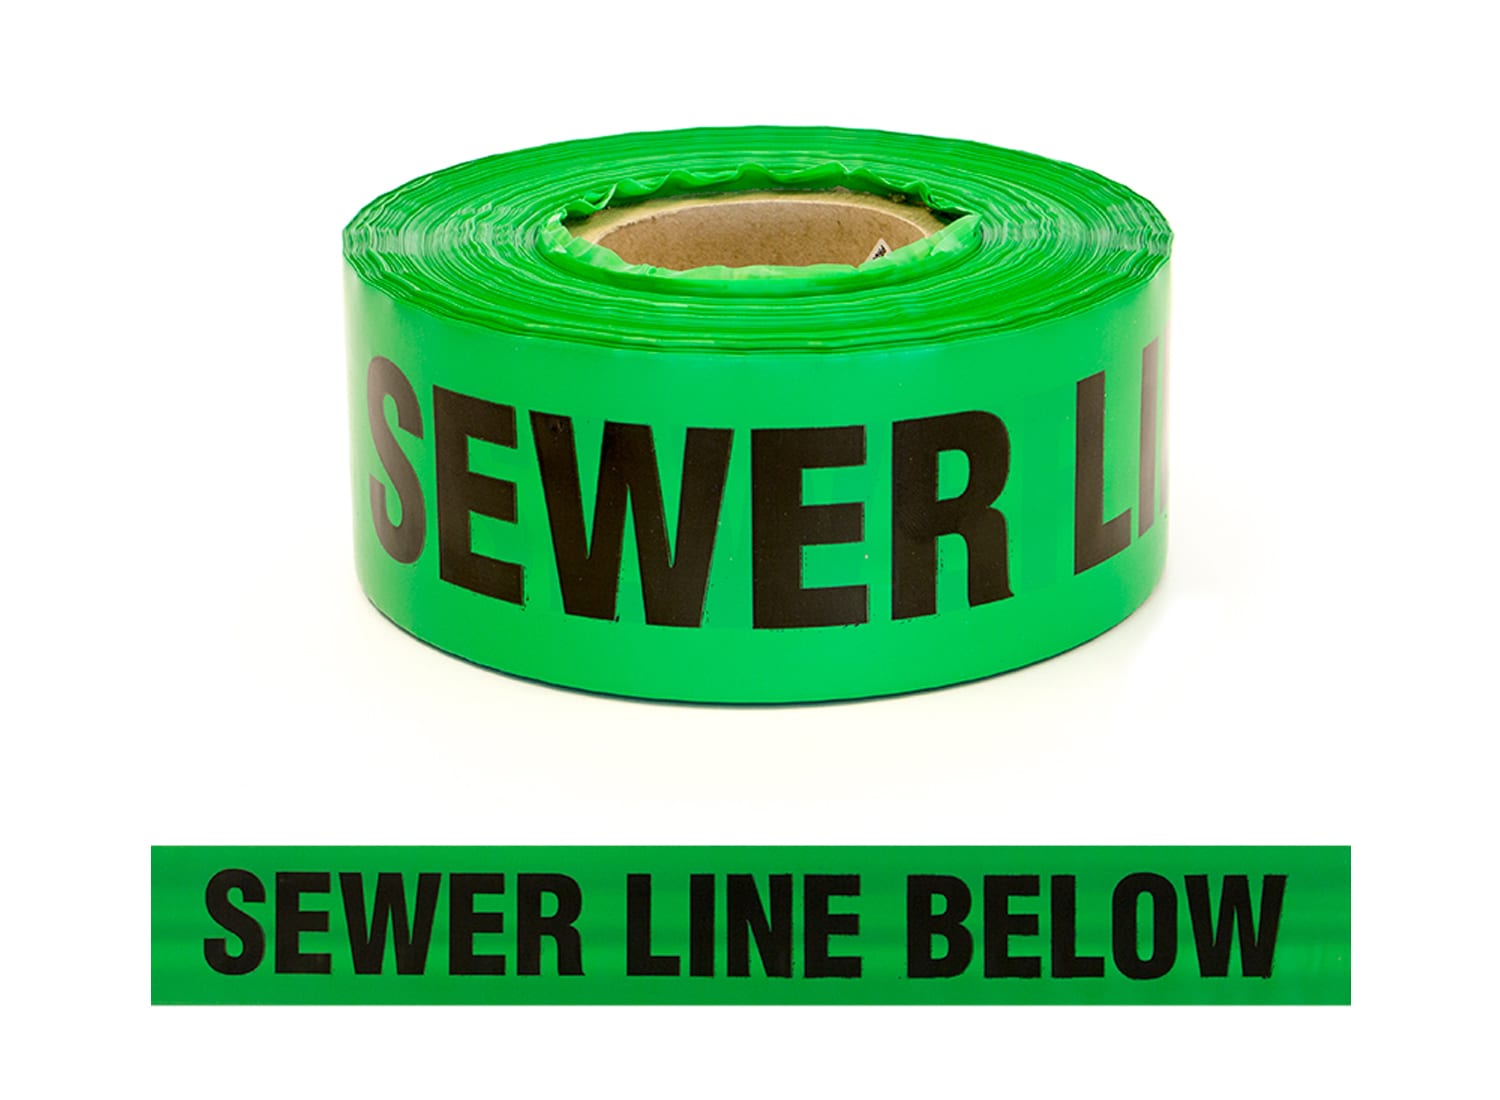 Trench Warning Tap - "Sewer Line Below"